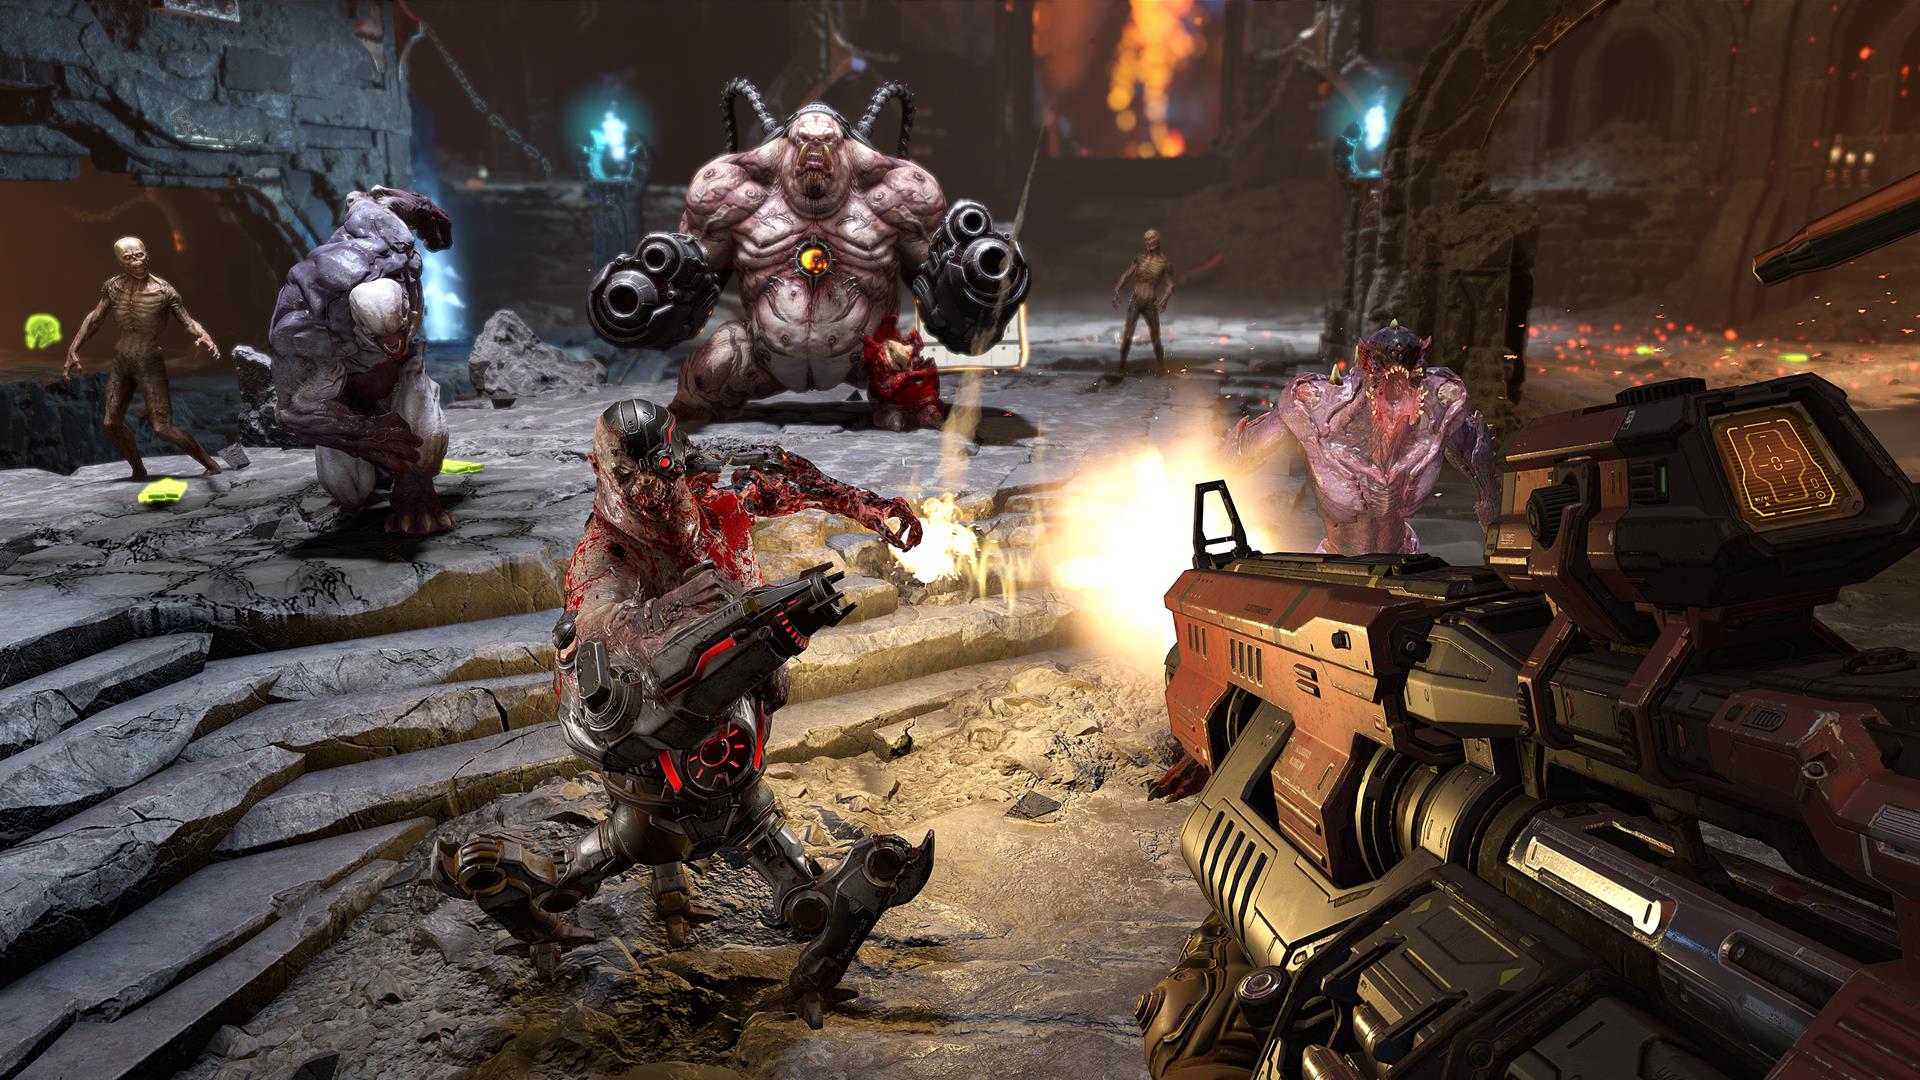 Image for “We're not making an immersive cinematic experience - we're making a video game” - why Doom Eternal has floating pickups